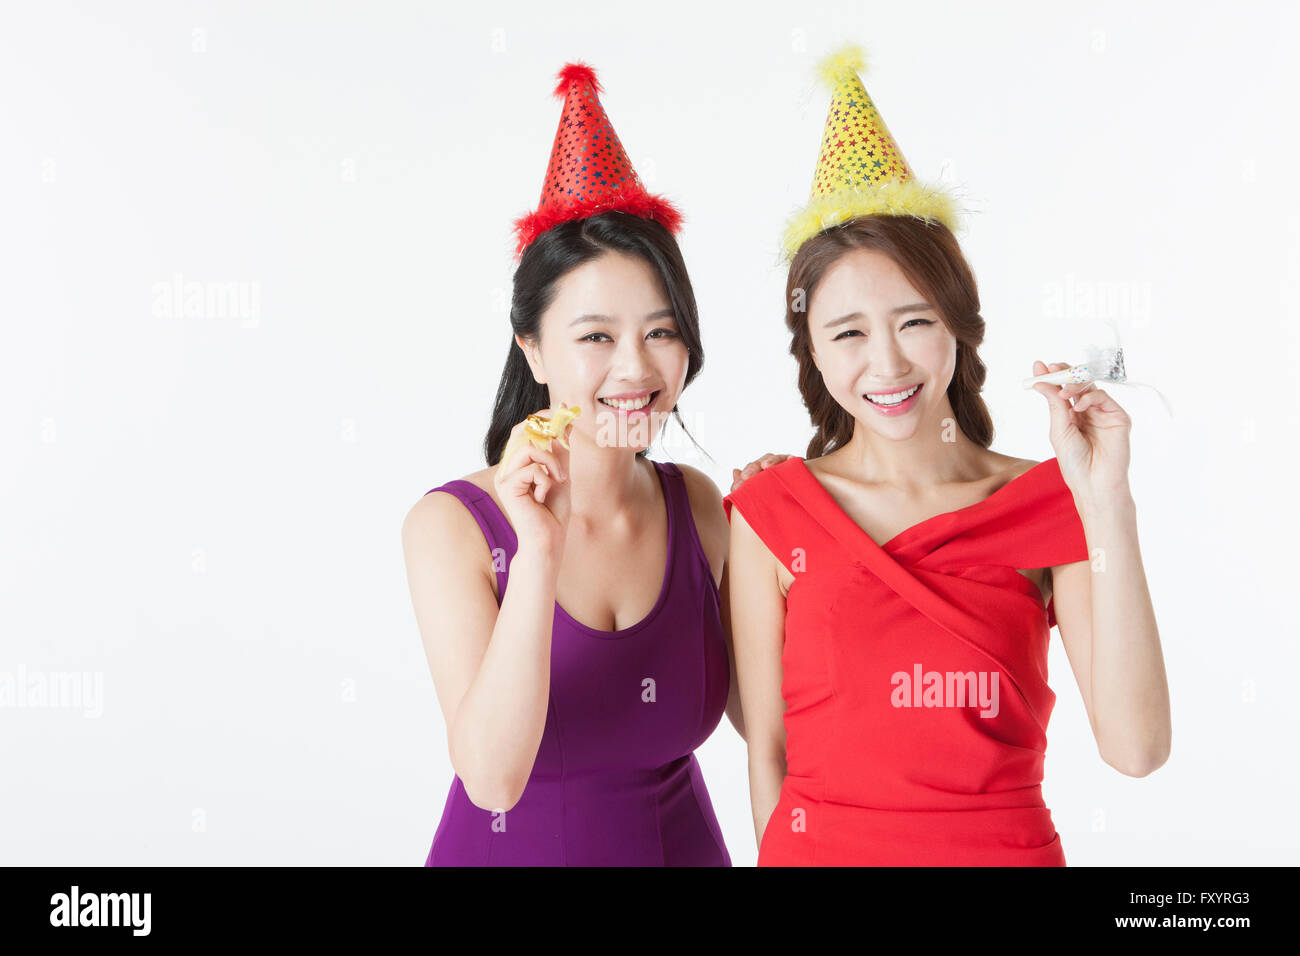 Portrait of smiling women holding party horns at party Banque D'Images